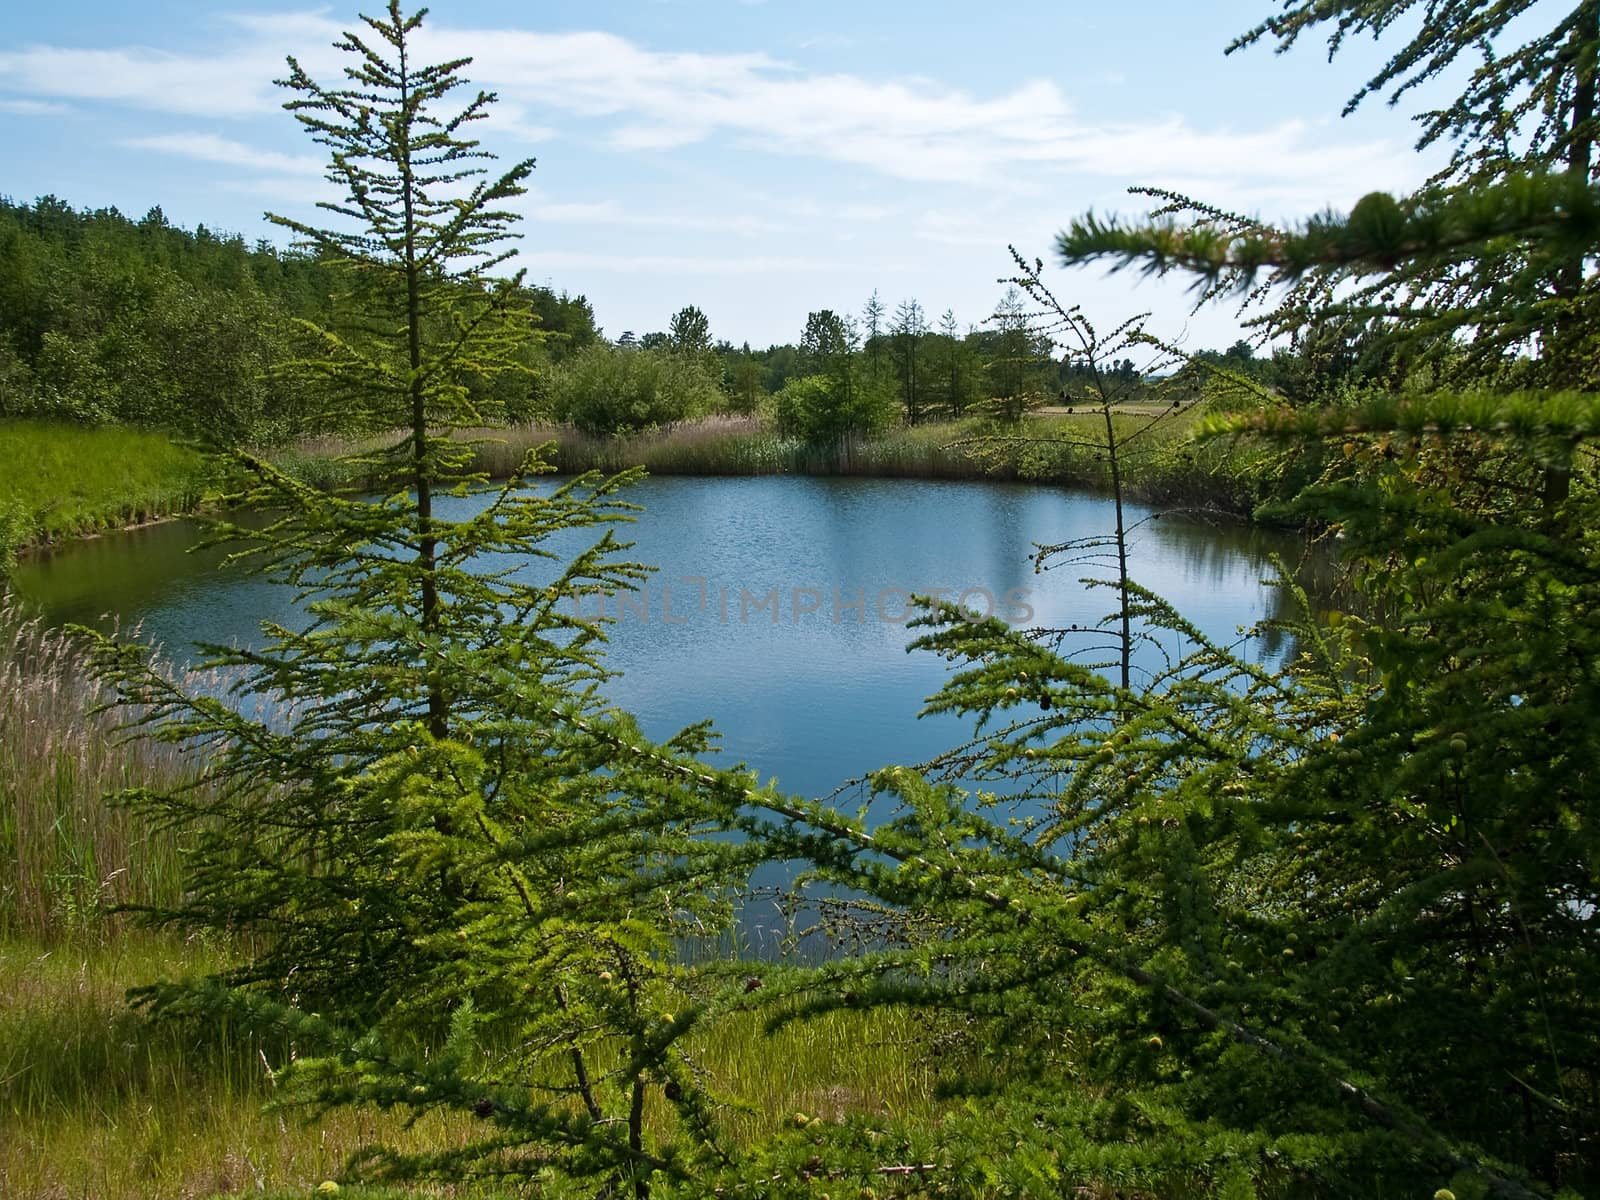 Amazing landscape of a small forest lake